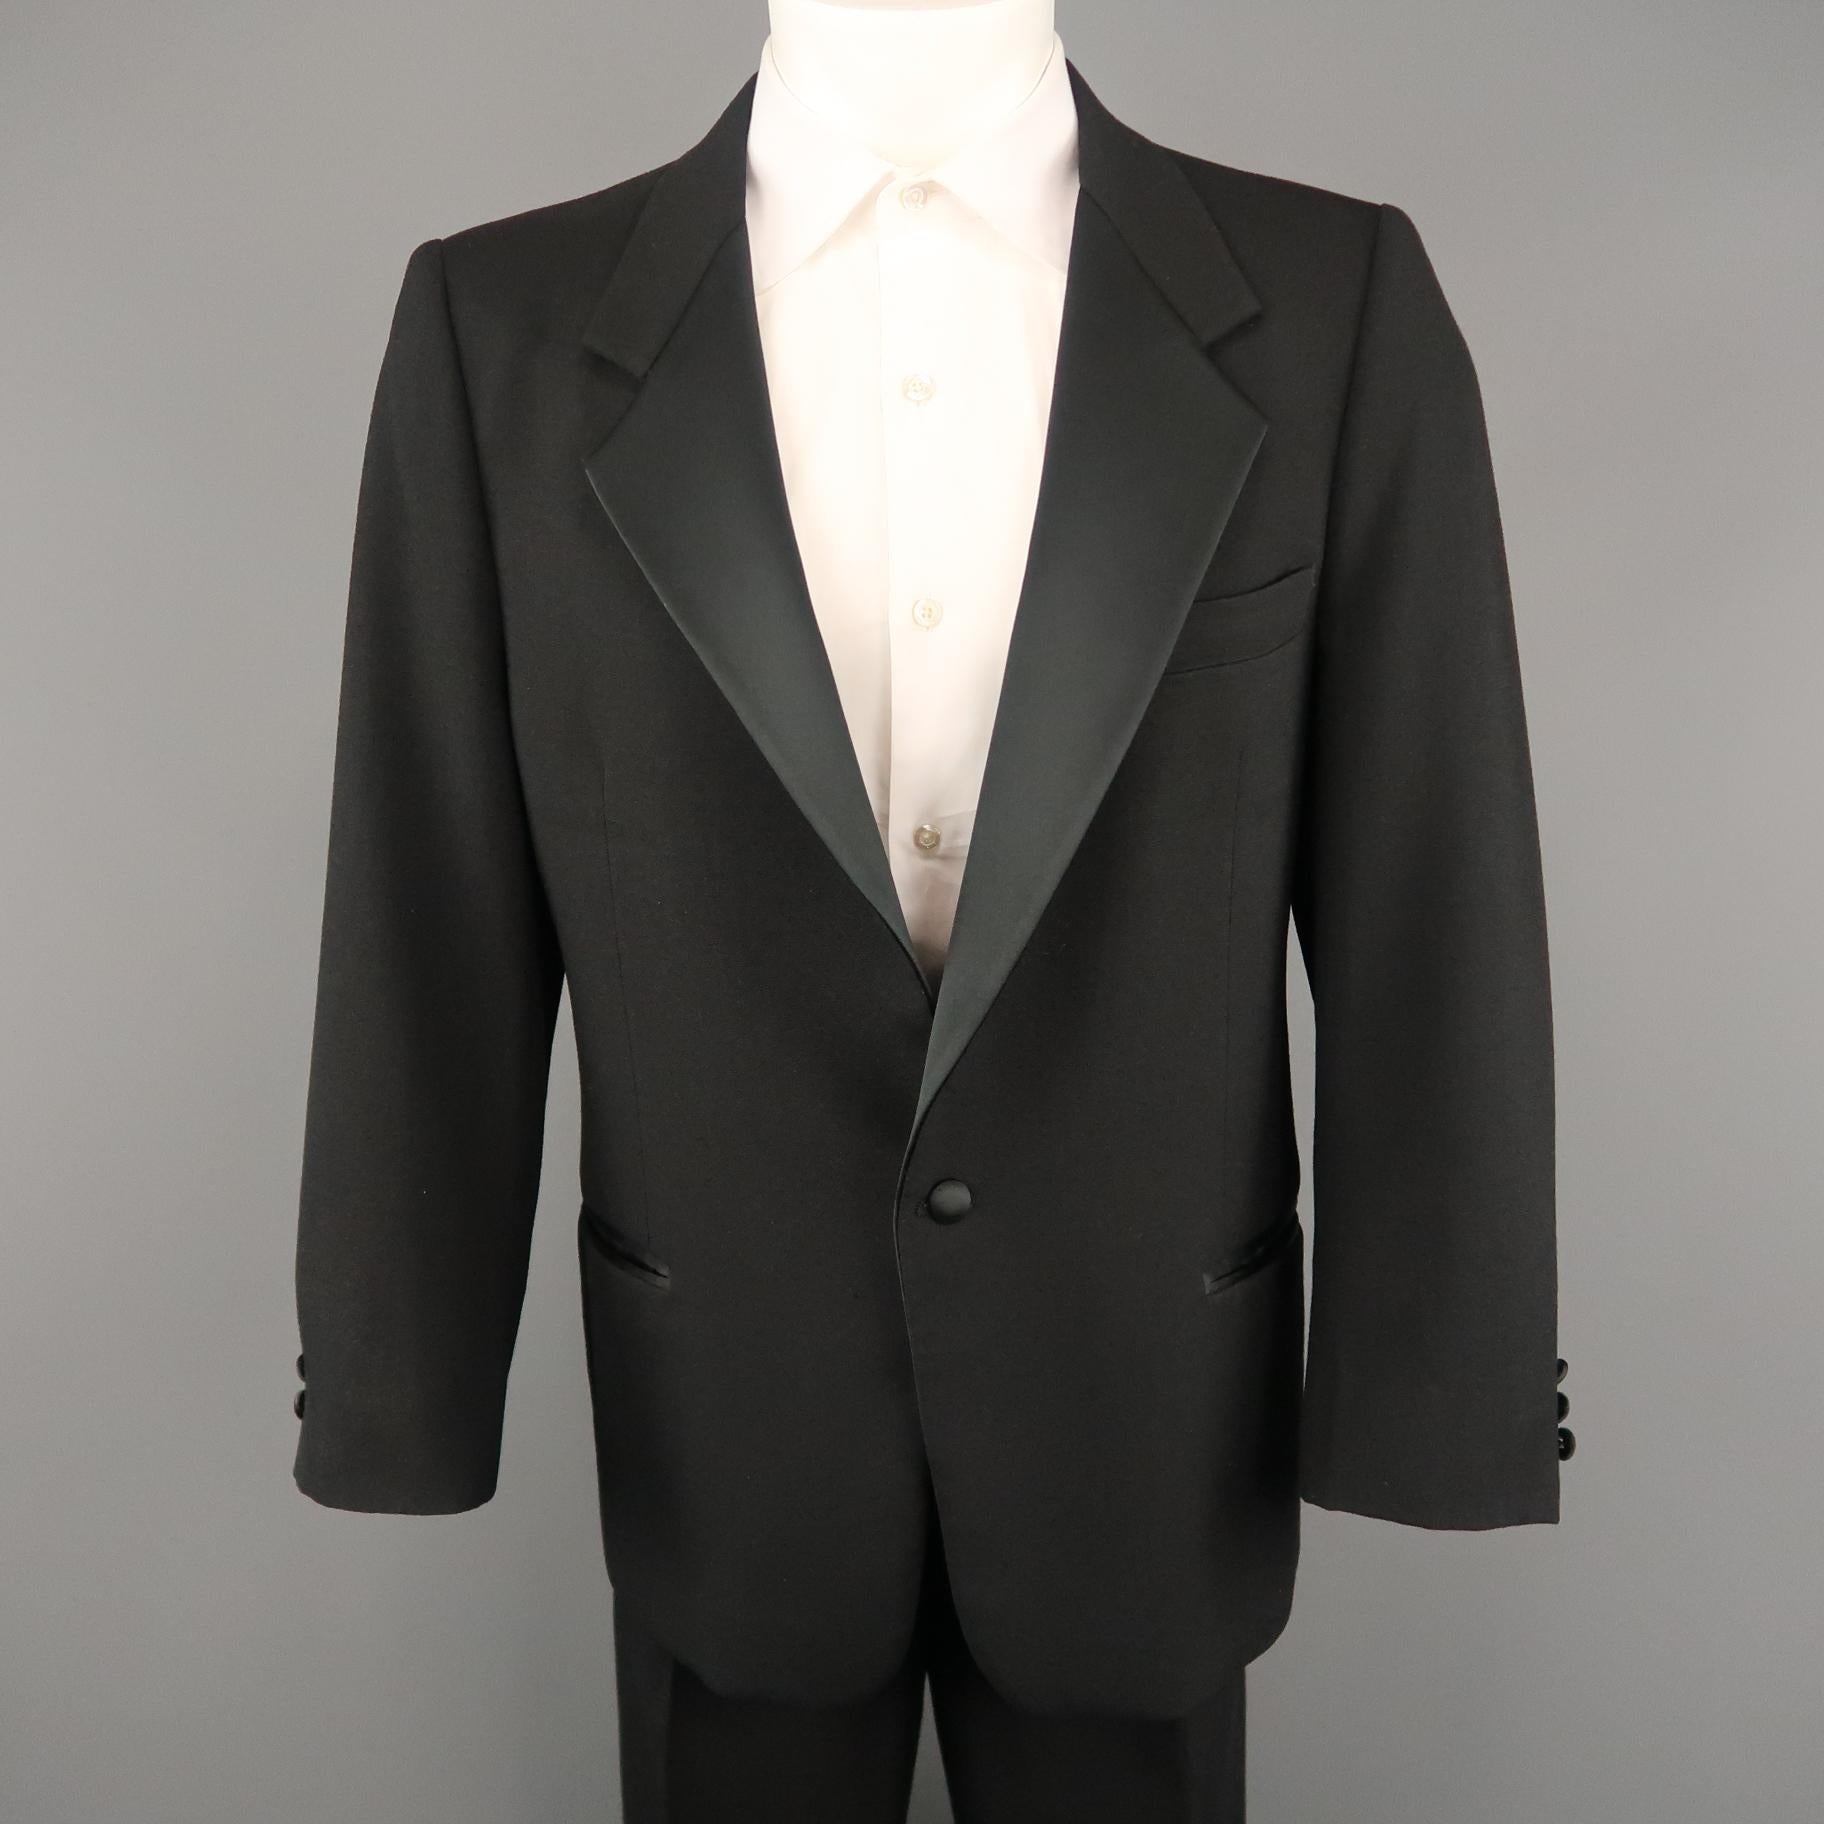 Vintage OSCAR DE LA RENTA men's tuxedo suit comes in black wool and includes a single breasted,  one button sport coat with satin notch lapel and matching pleated ribbon stripe trousers.
 
Excellent Pre-Owned Condition.
Marked: (no size)
